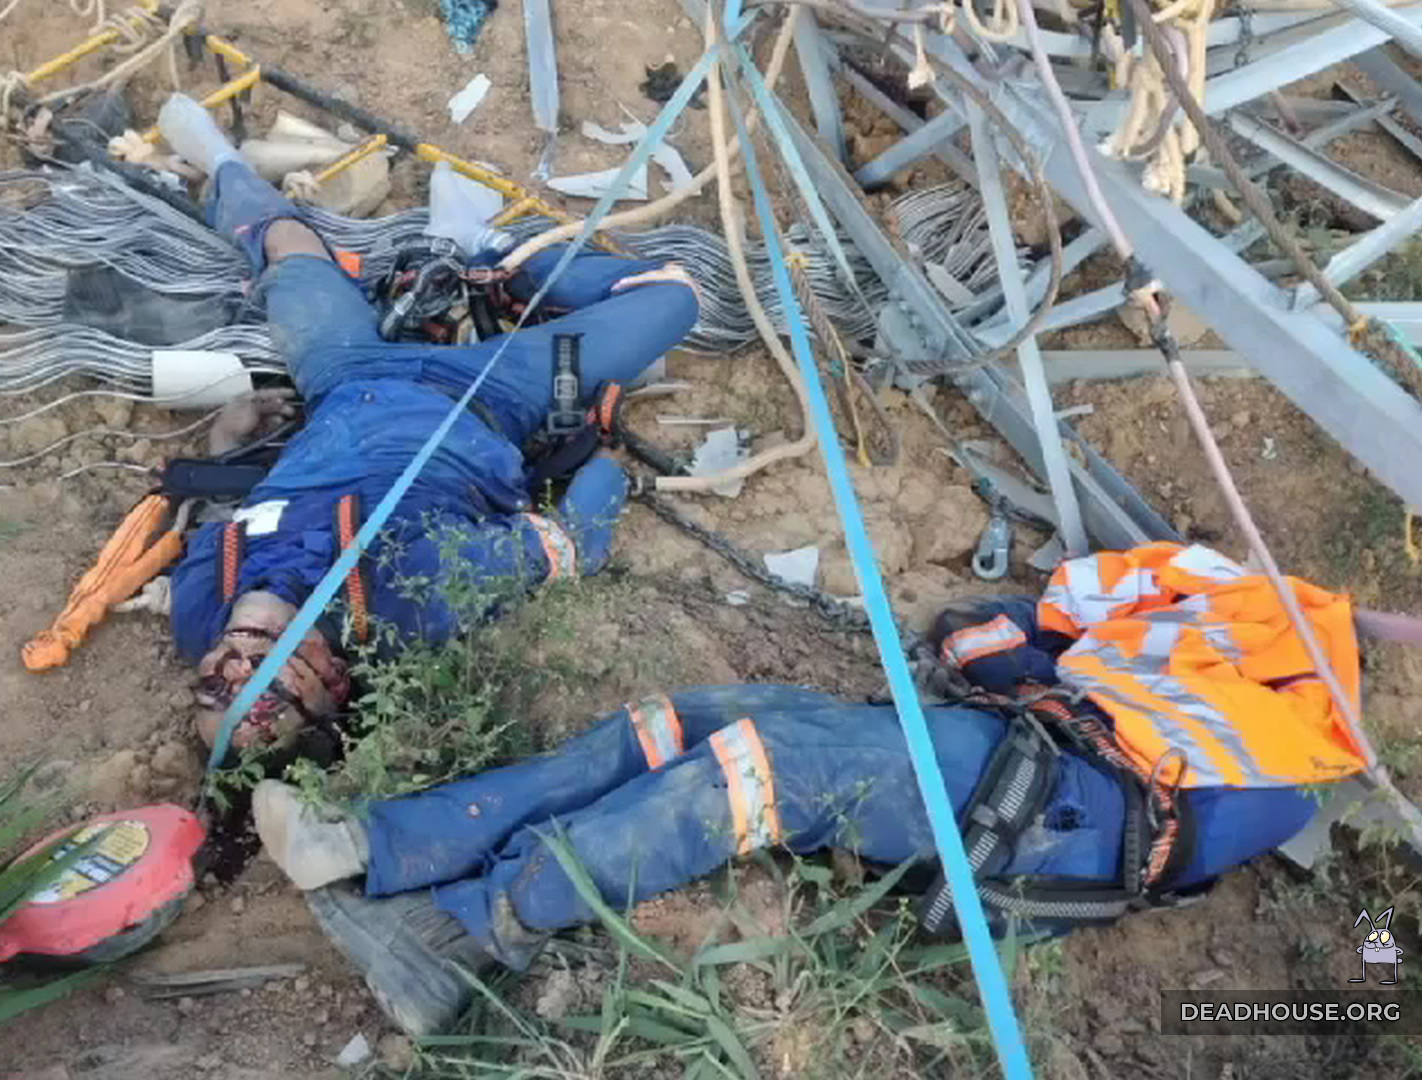 The corpse of a worker next to the debris of the power line mast